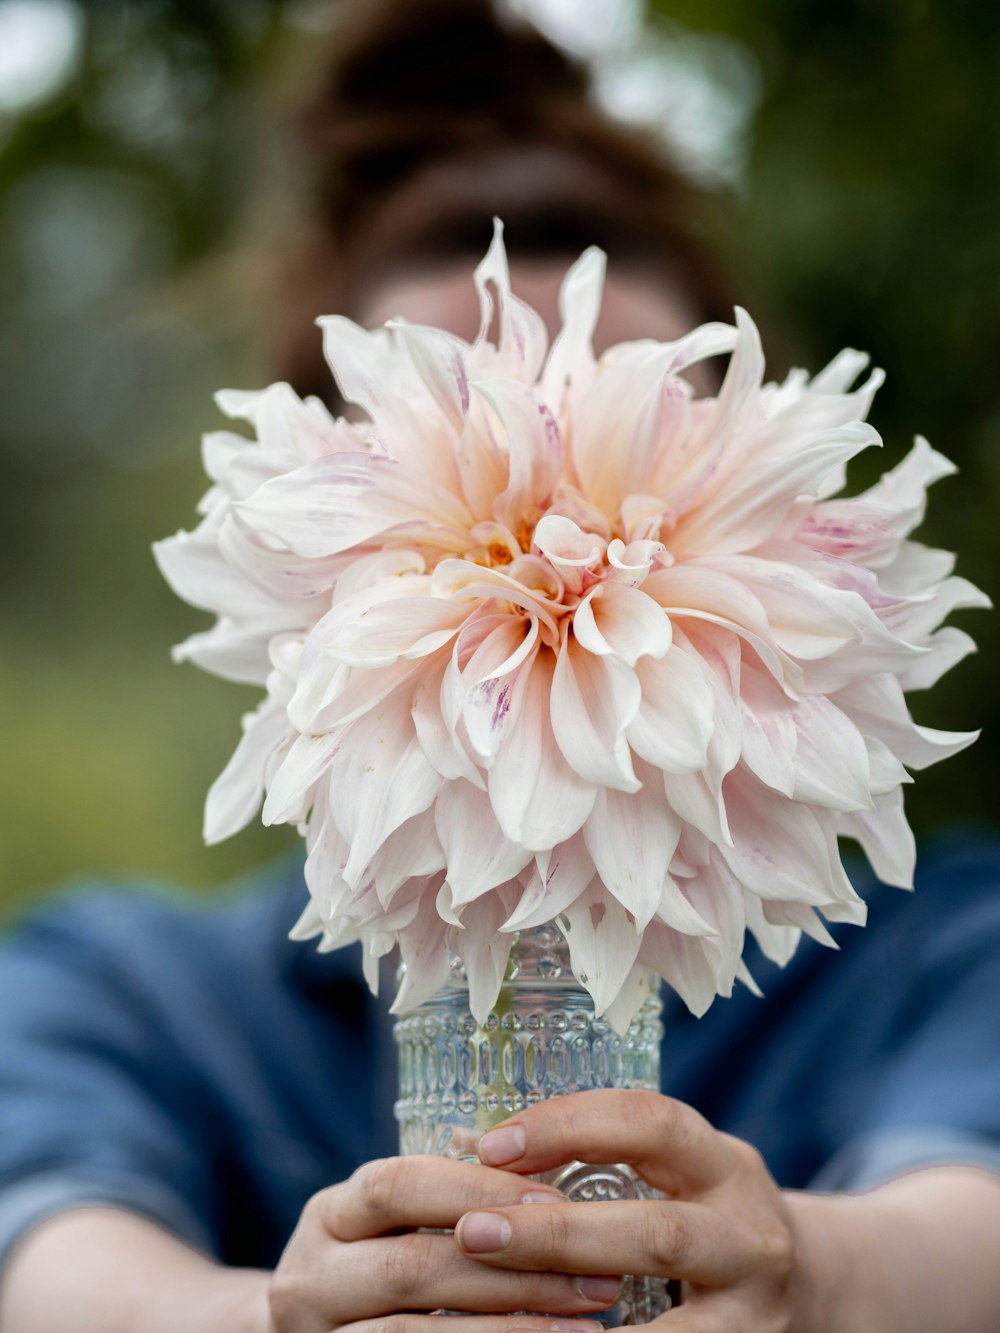 a person holding a vase with a flower in it